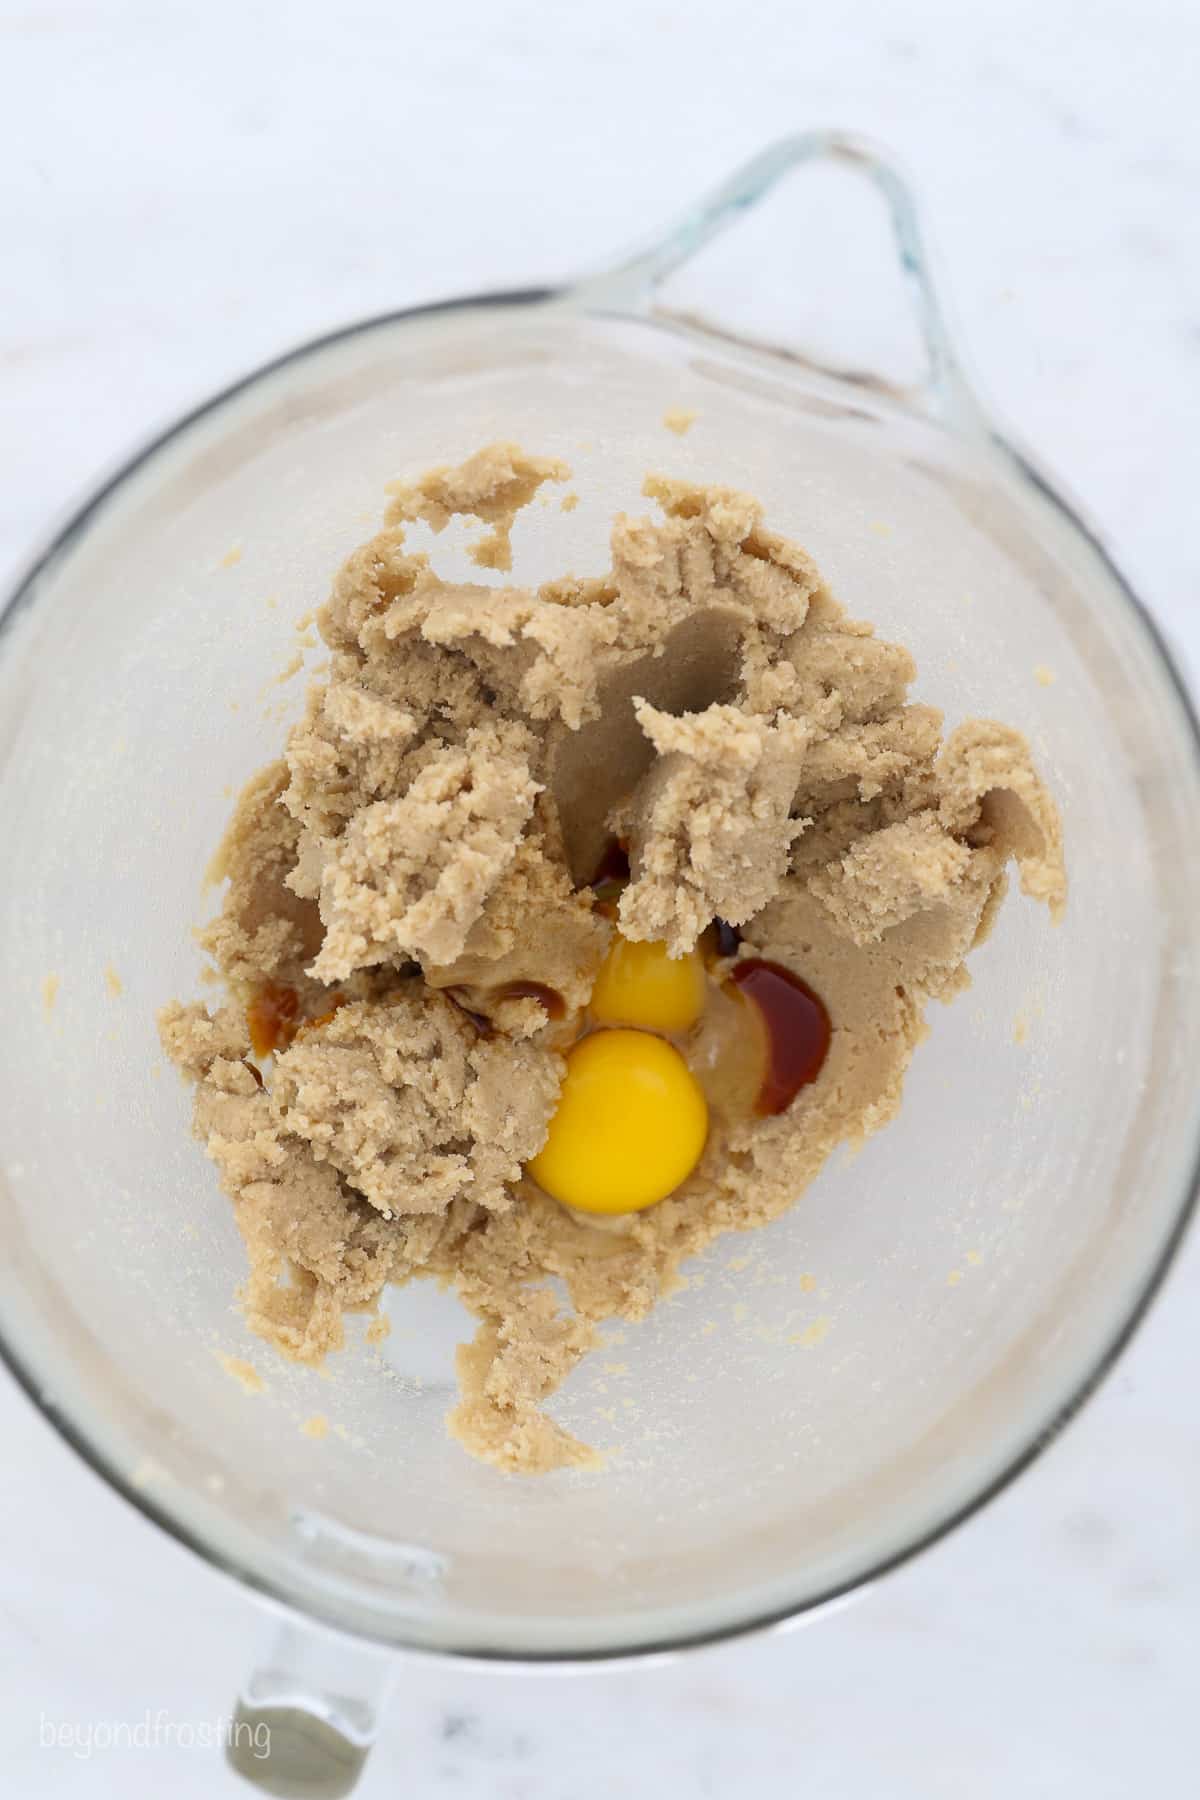 Eggs and vanilla added to cookie dough in a glass bowl.